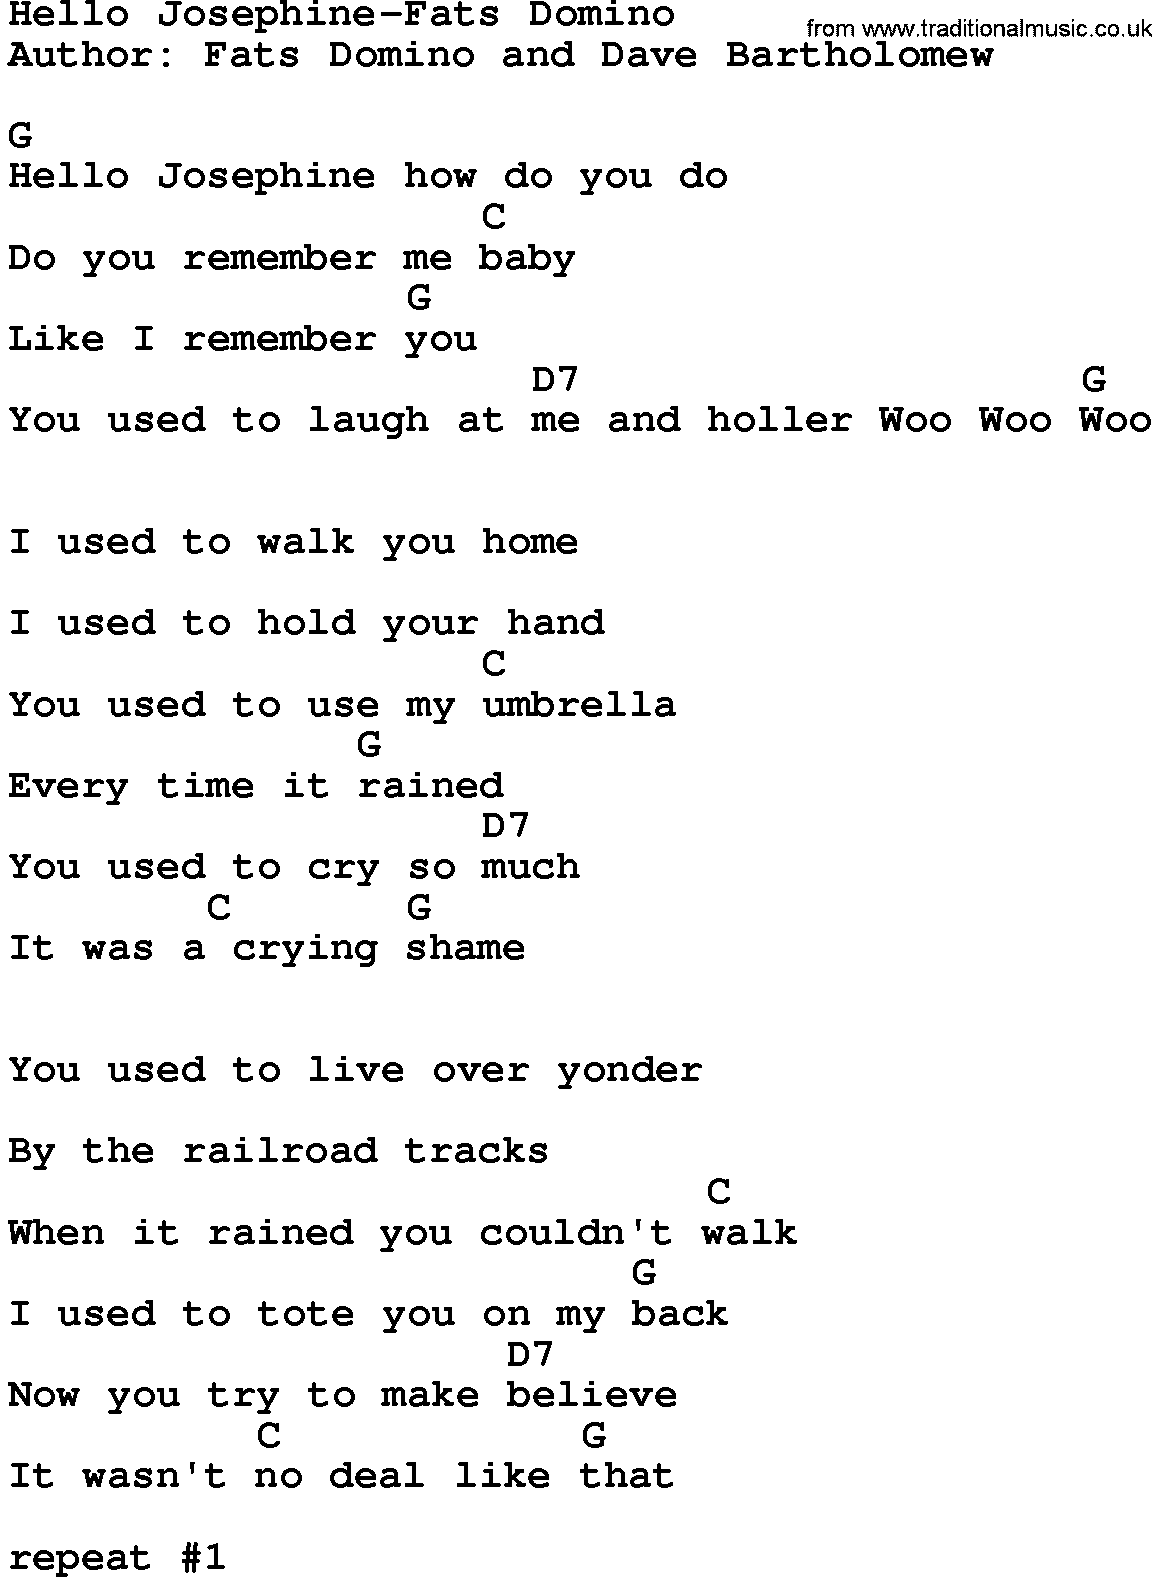 Country music song: Hello Josephine-Fats Domino lyrics and chords